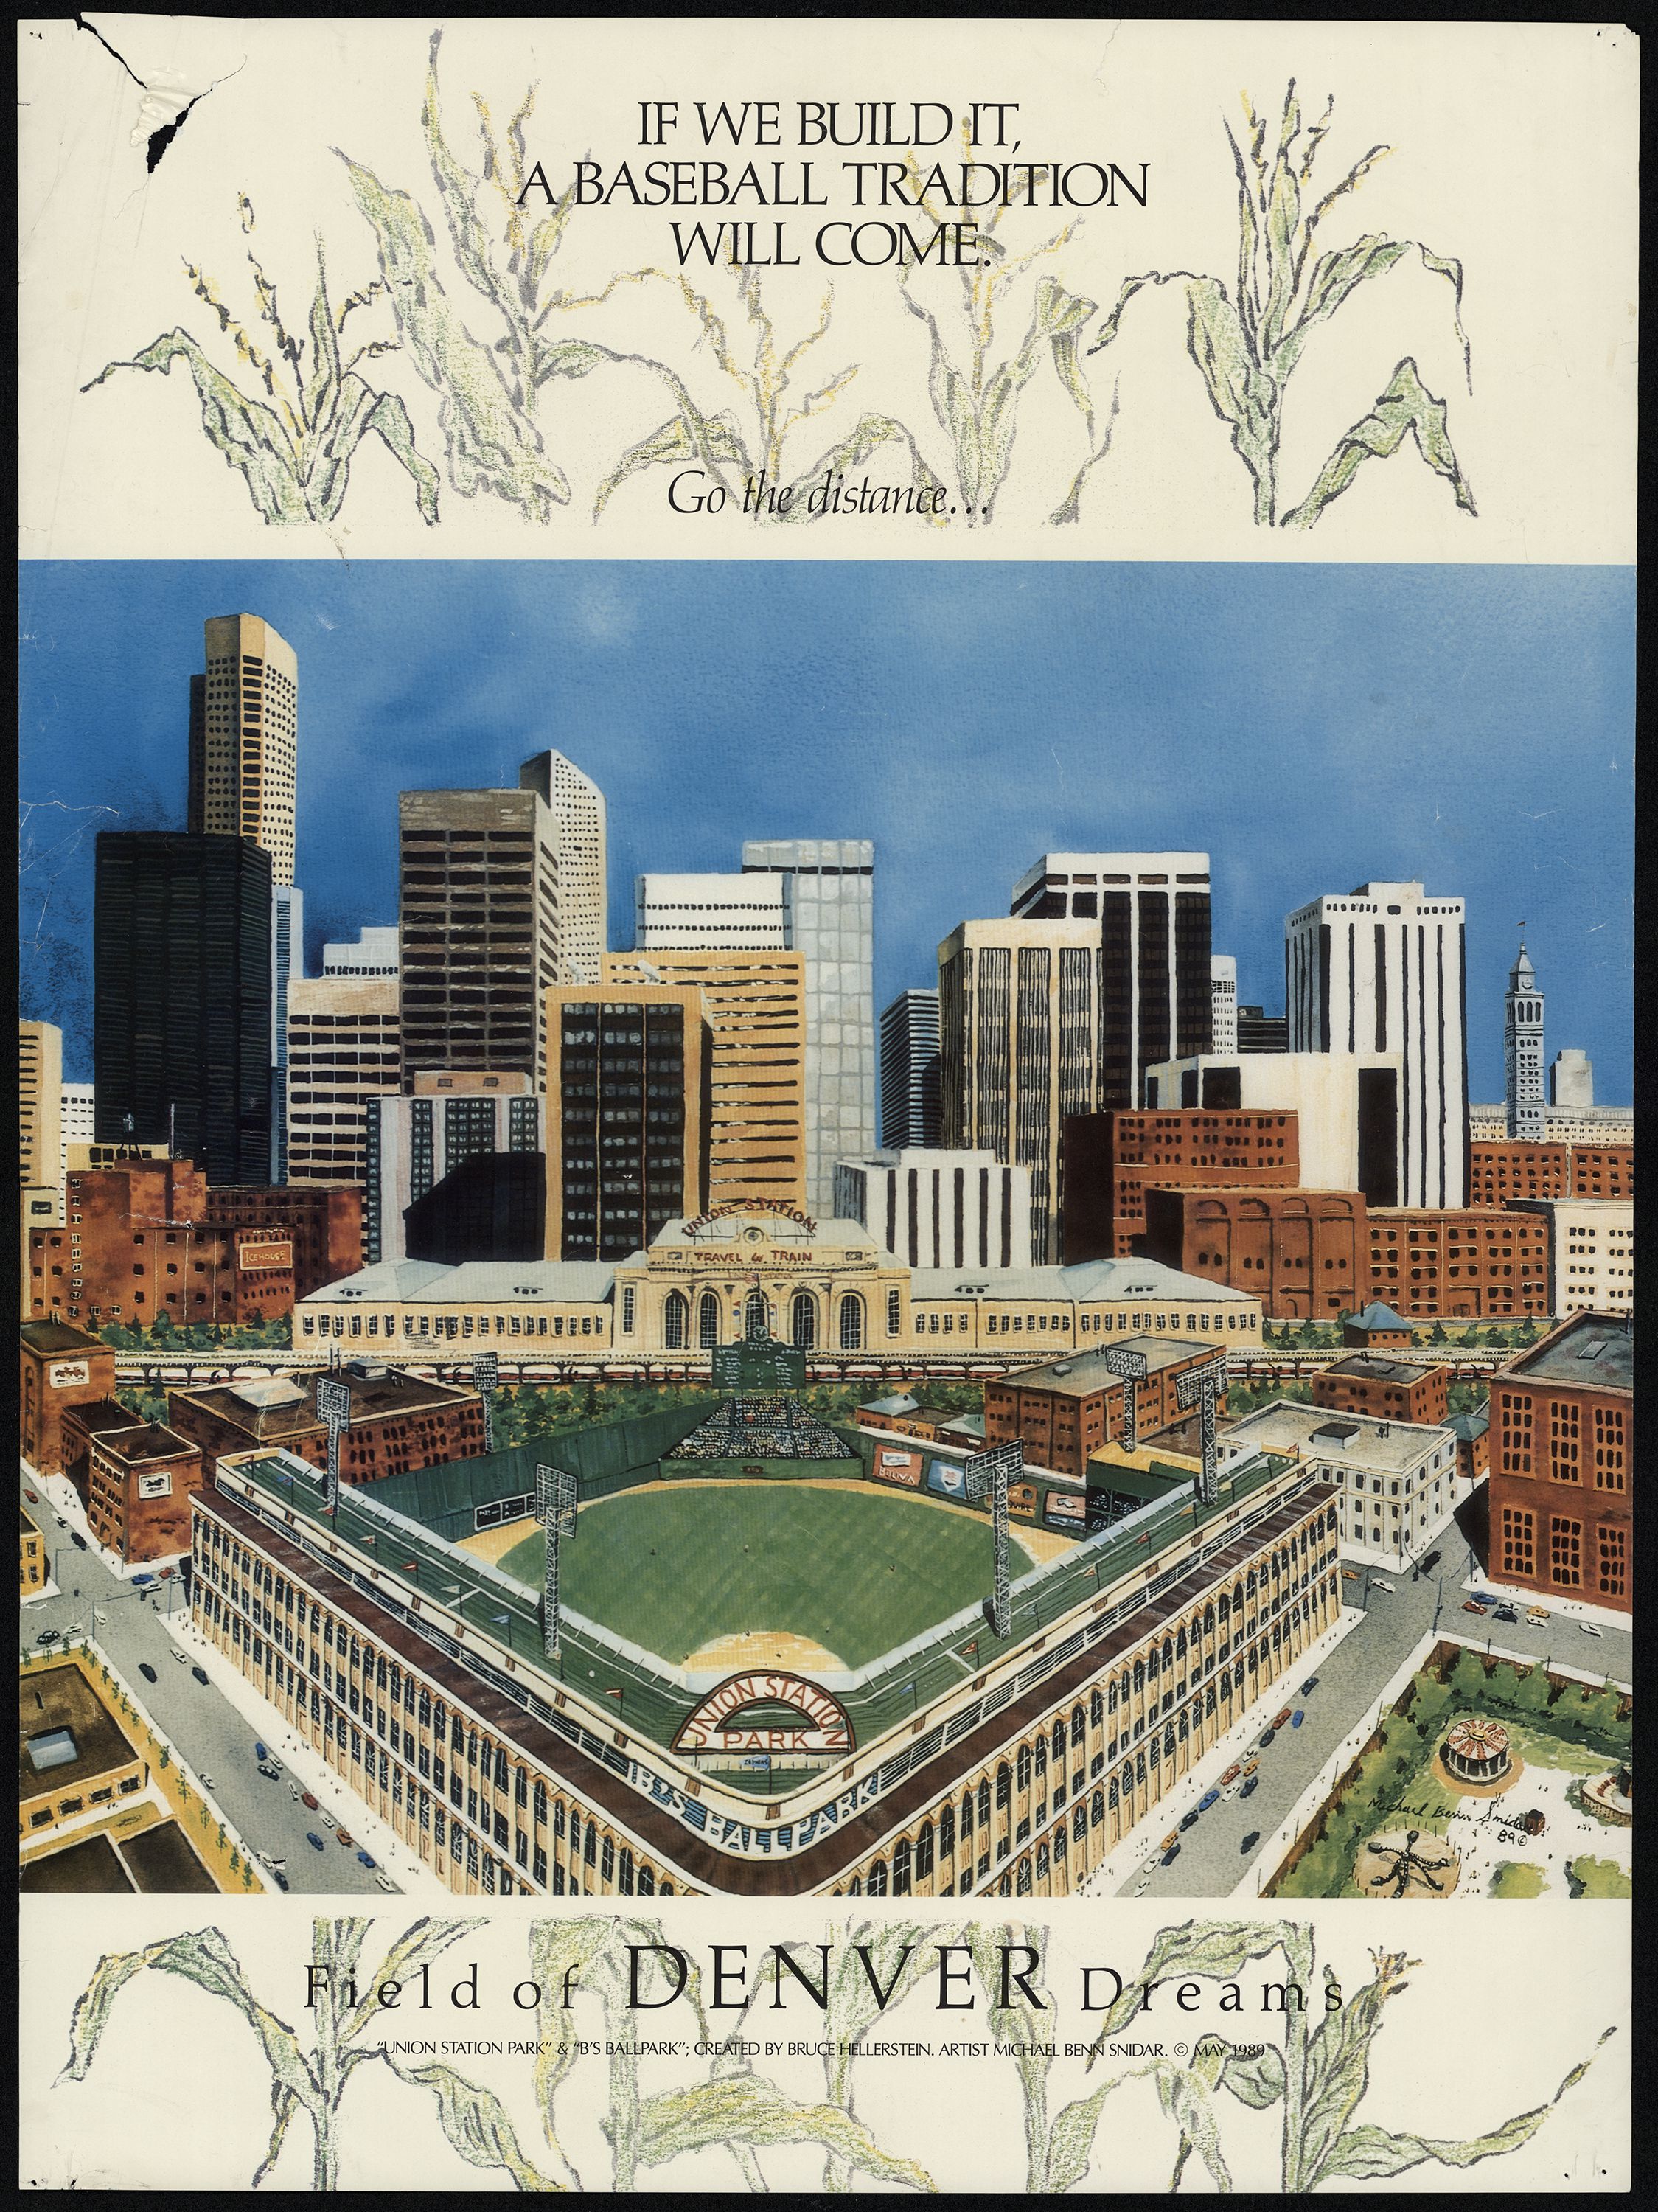 Image of a poster advertising Denver's Coors Field. It has a color rendering of the ballpark, with Denver's skyscrapers in the background. At the top of the poster, it says "If we build it, a baseball tradition will come. Go the distance..." and at the bottom, it continues, "Field of DENVER Dreams."